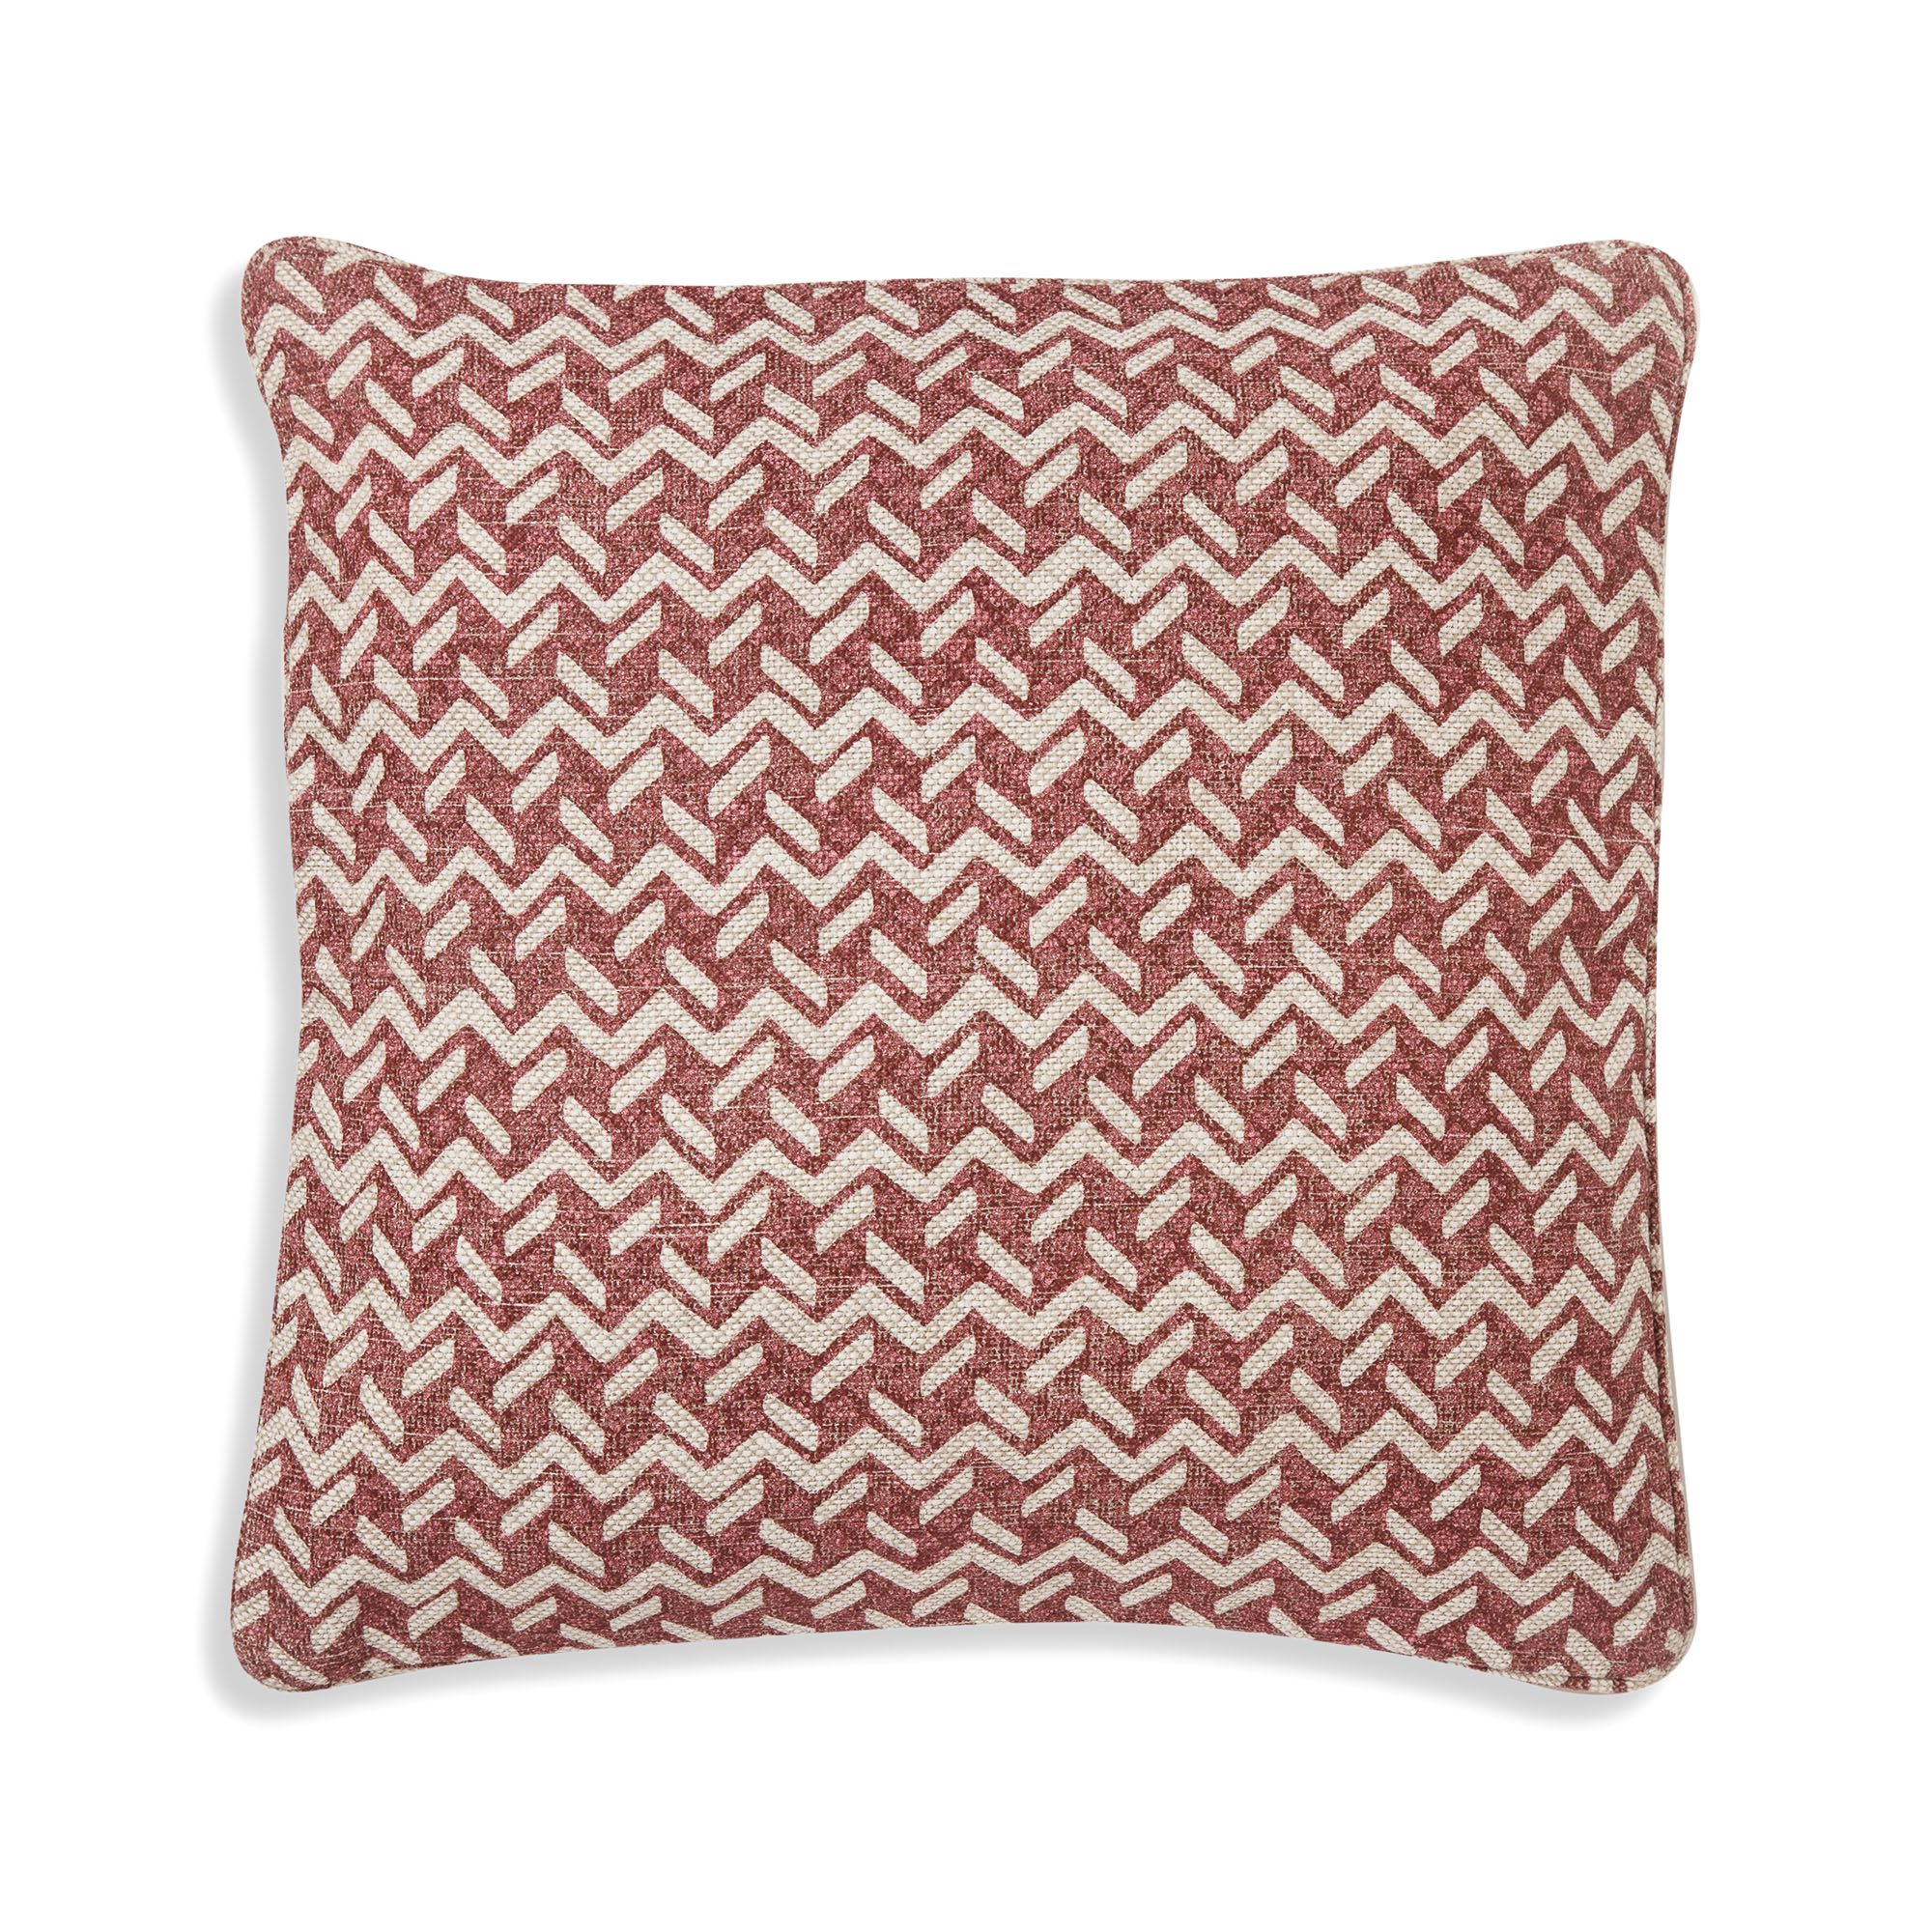 Oblong Cushion in Red Chiltern